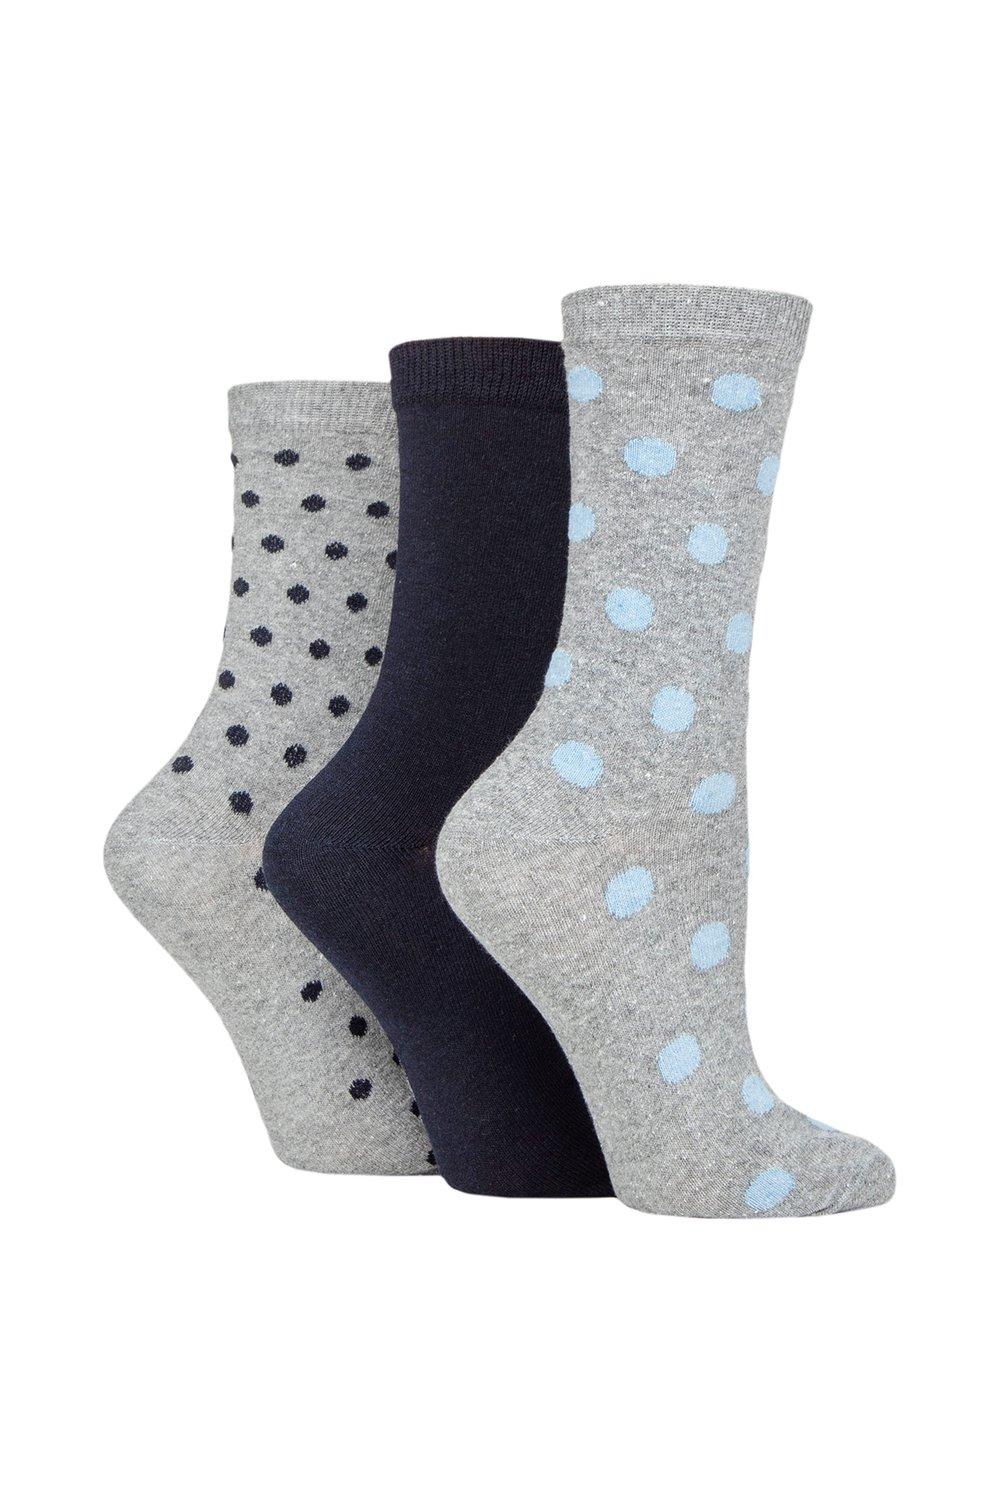 3 Pair 100% Recycled Spots Cotton Socks